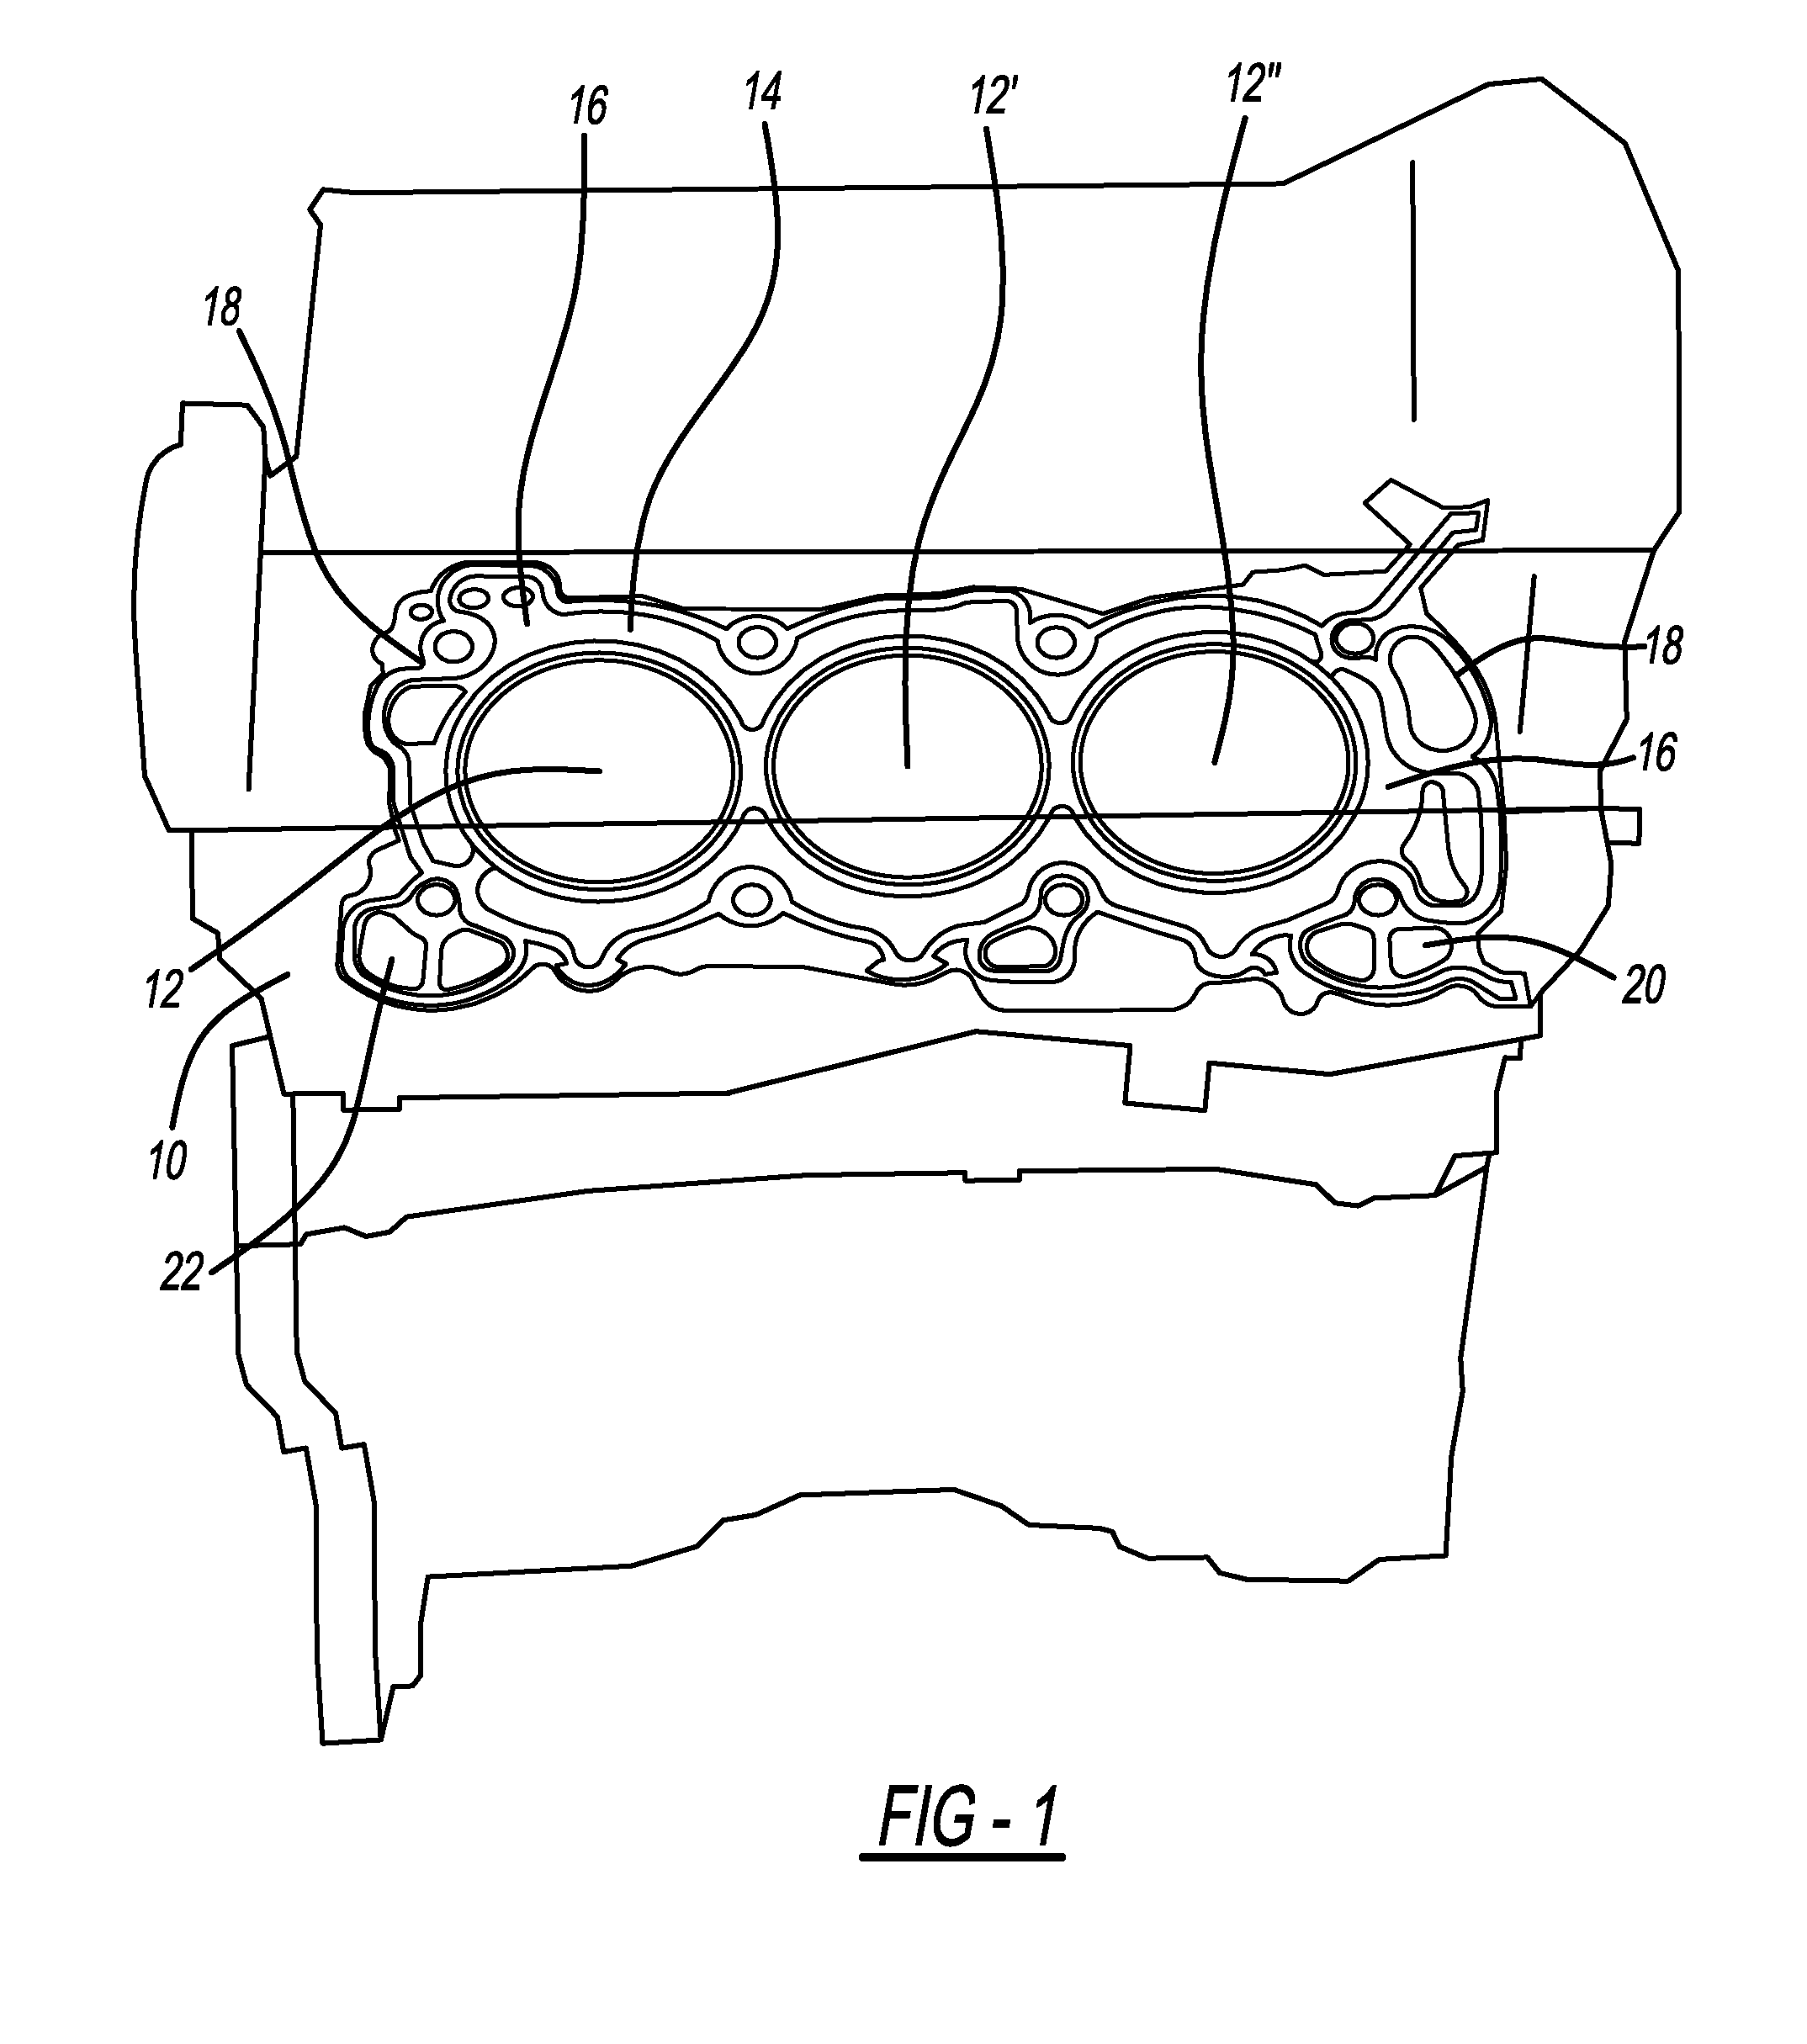 Cylinder gasket having oil drainback constraint feature for use with internal combustion engine